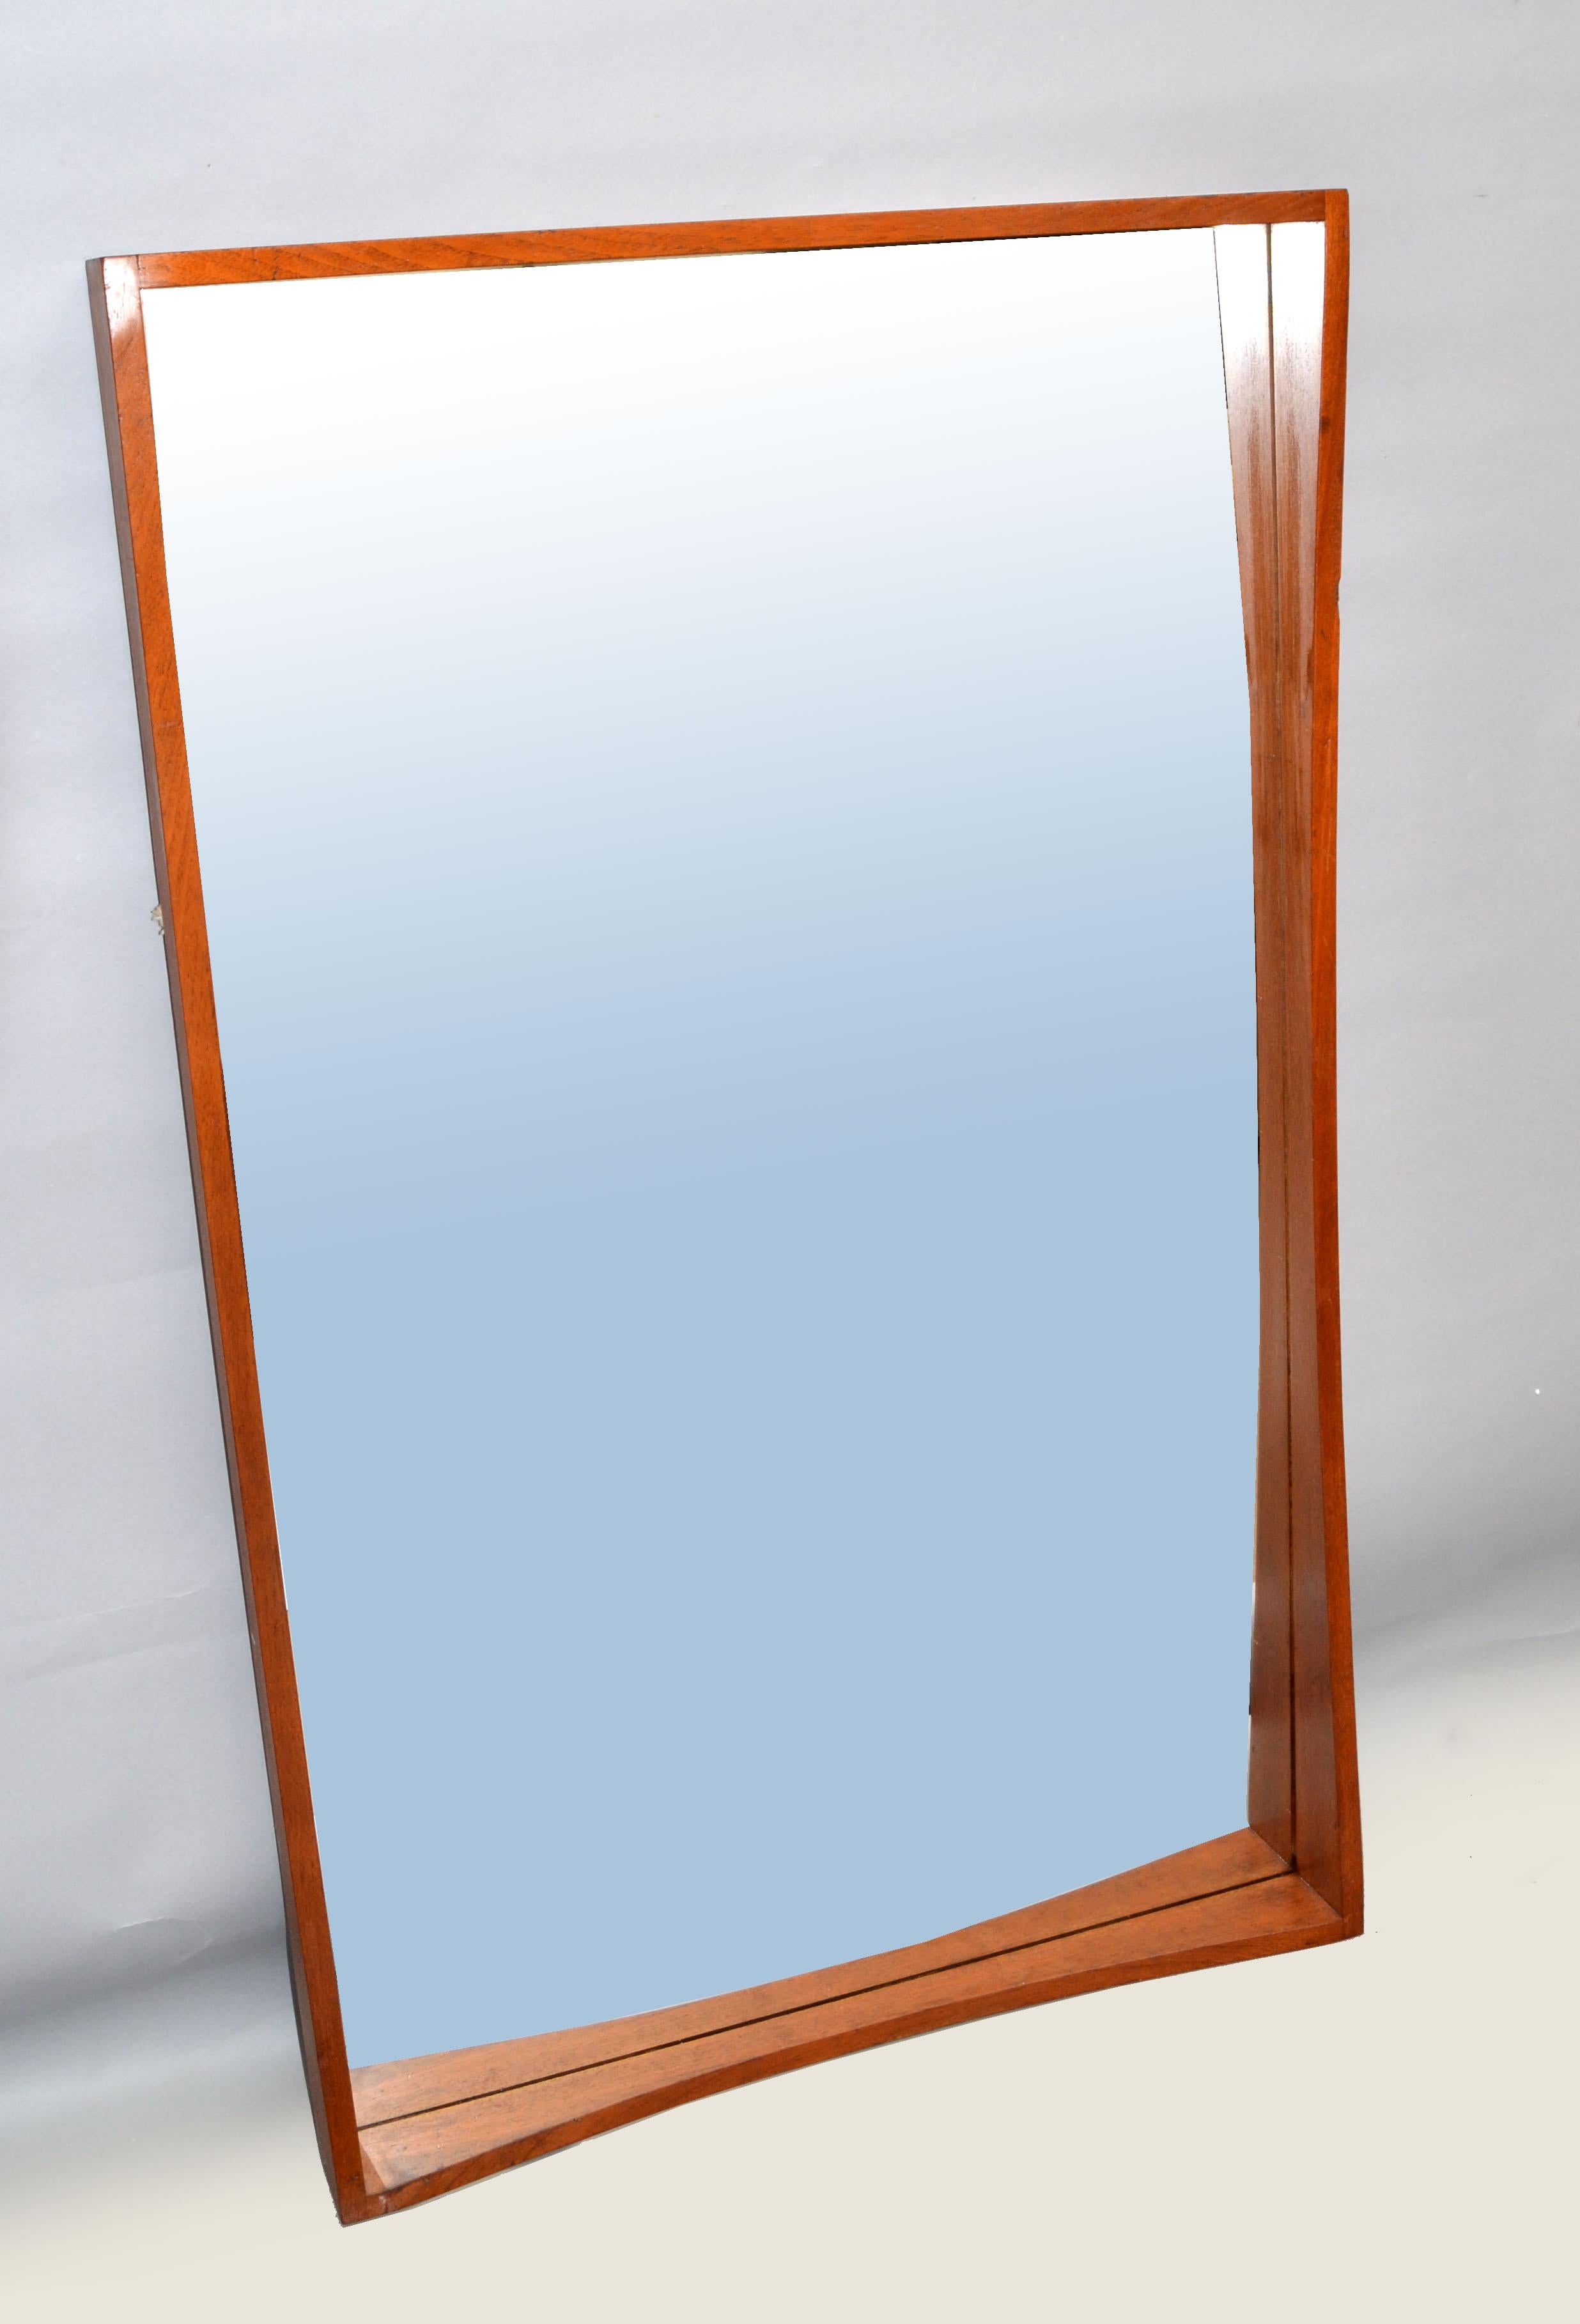 Pedersen & Hansen Danish Modern rectangle mirror set in a complementary dovetailed Teak Wood Frame.
Can be hung Vertical as well as horizontal.
Original foil label on the reverse.
In pristine vintage condition with some scuffs and scratches to